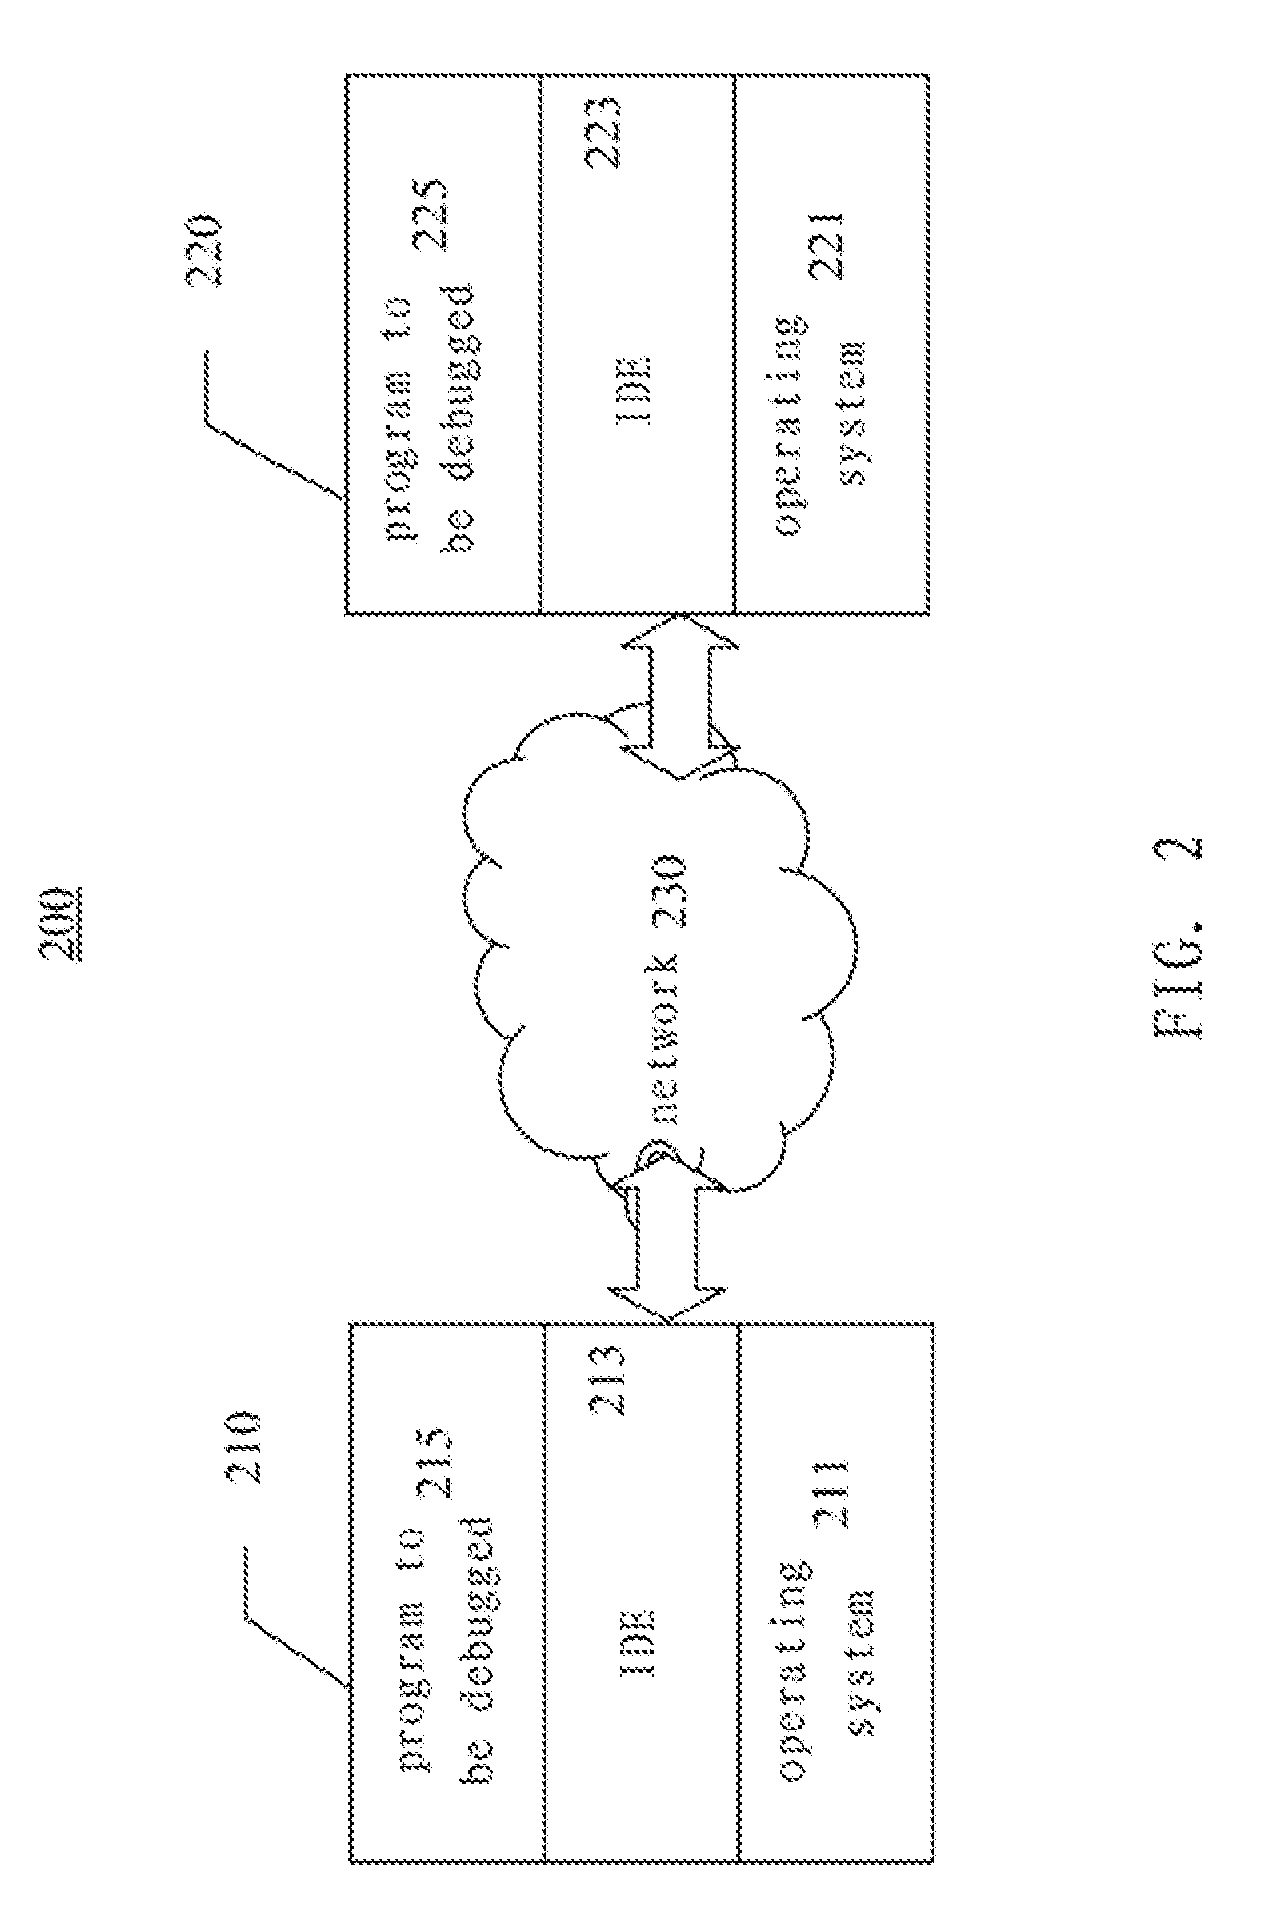 Messaging system based group joint debugging system and method